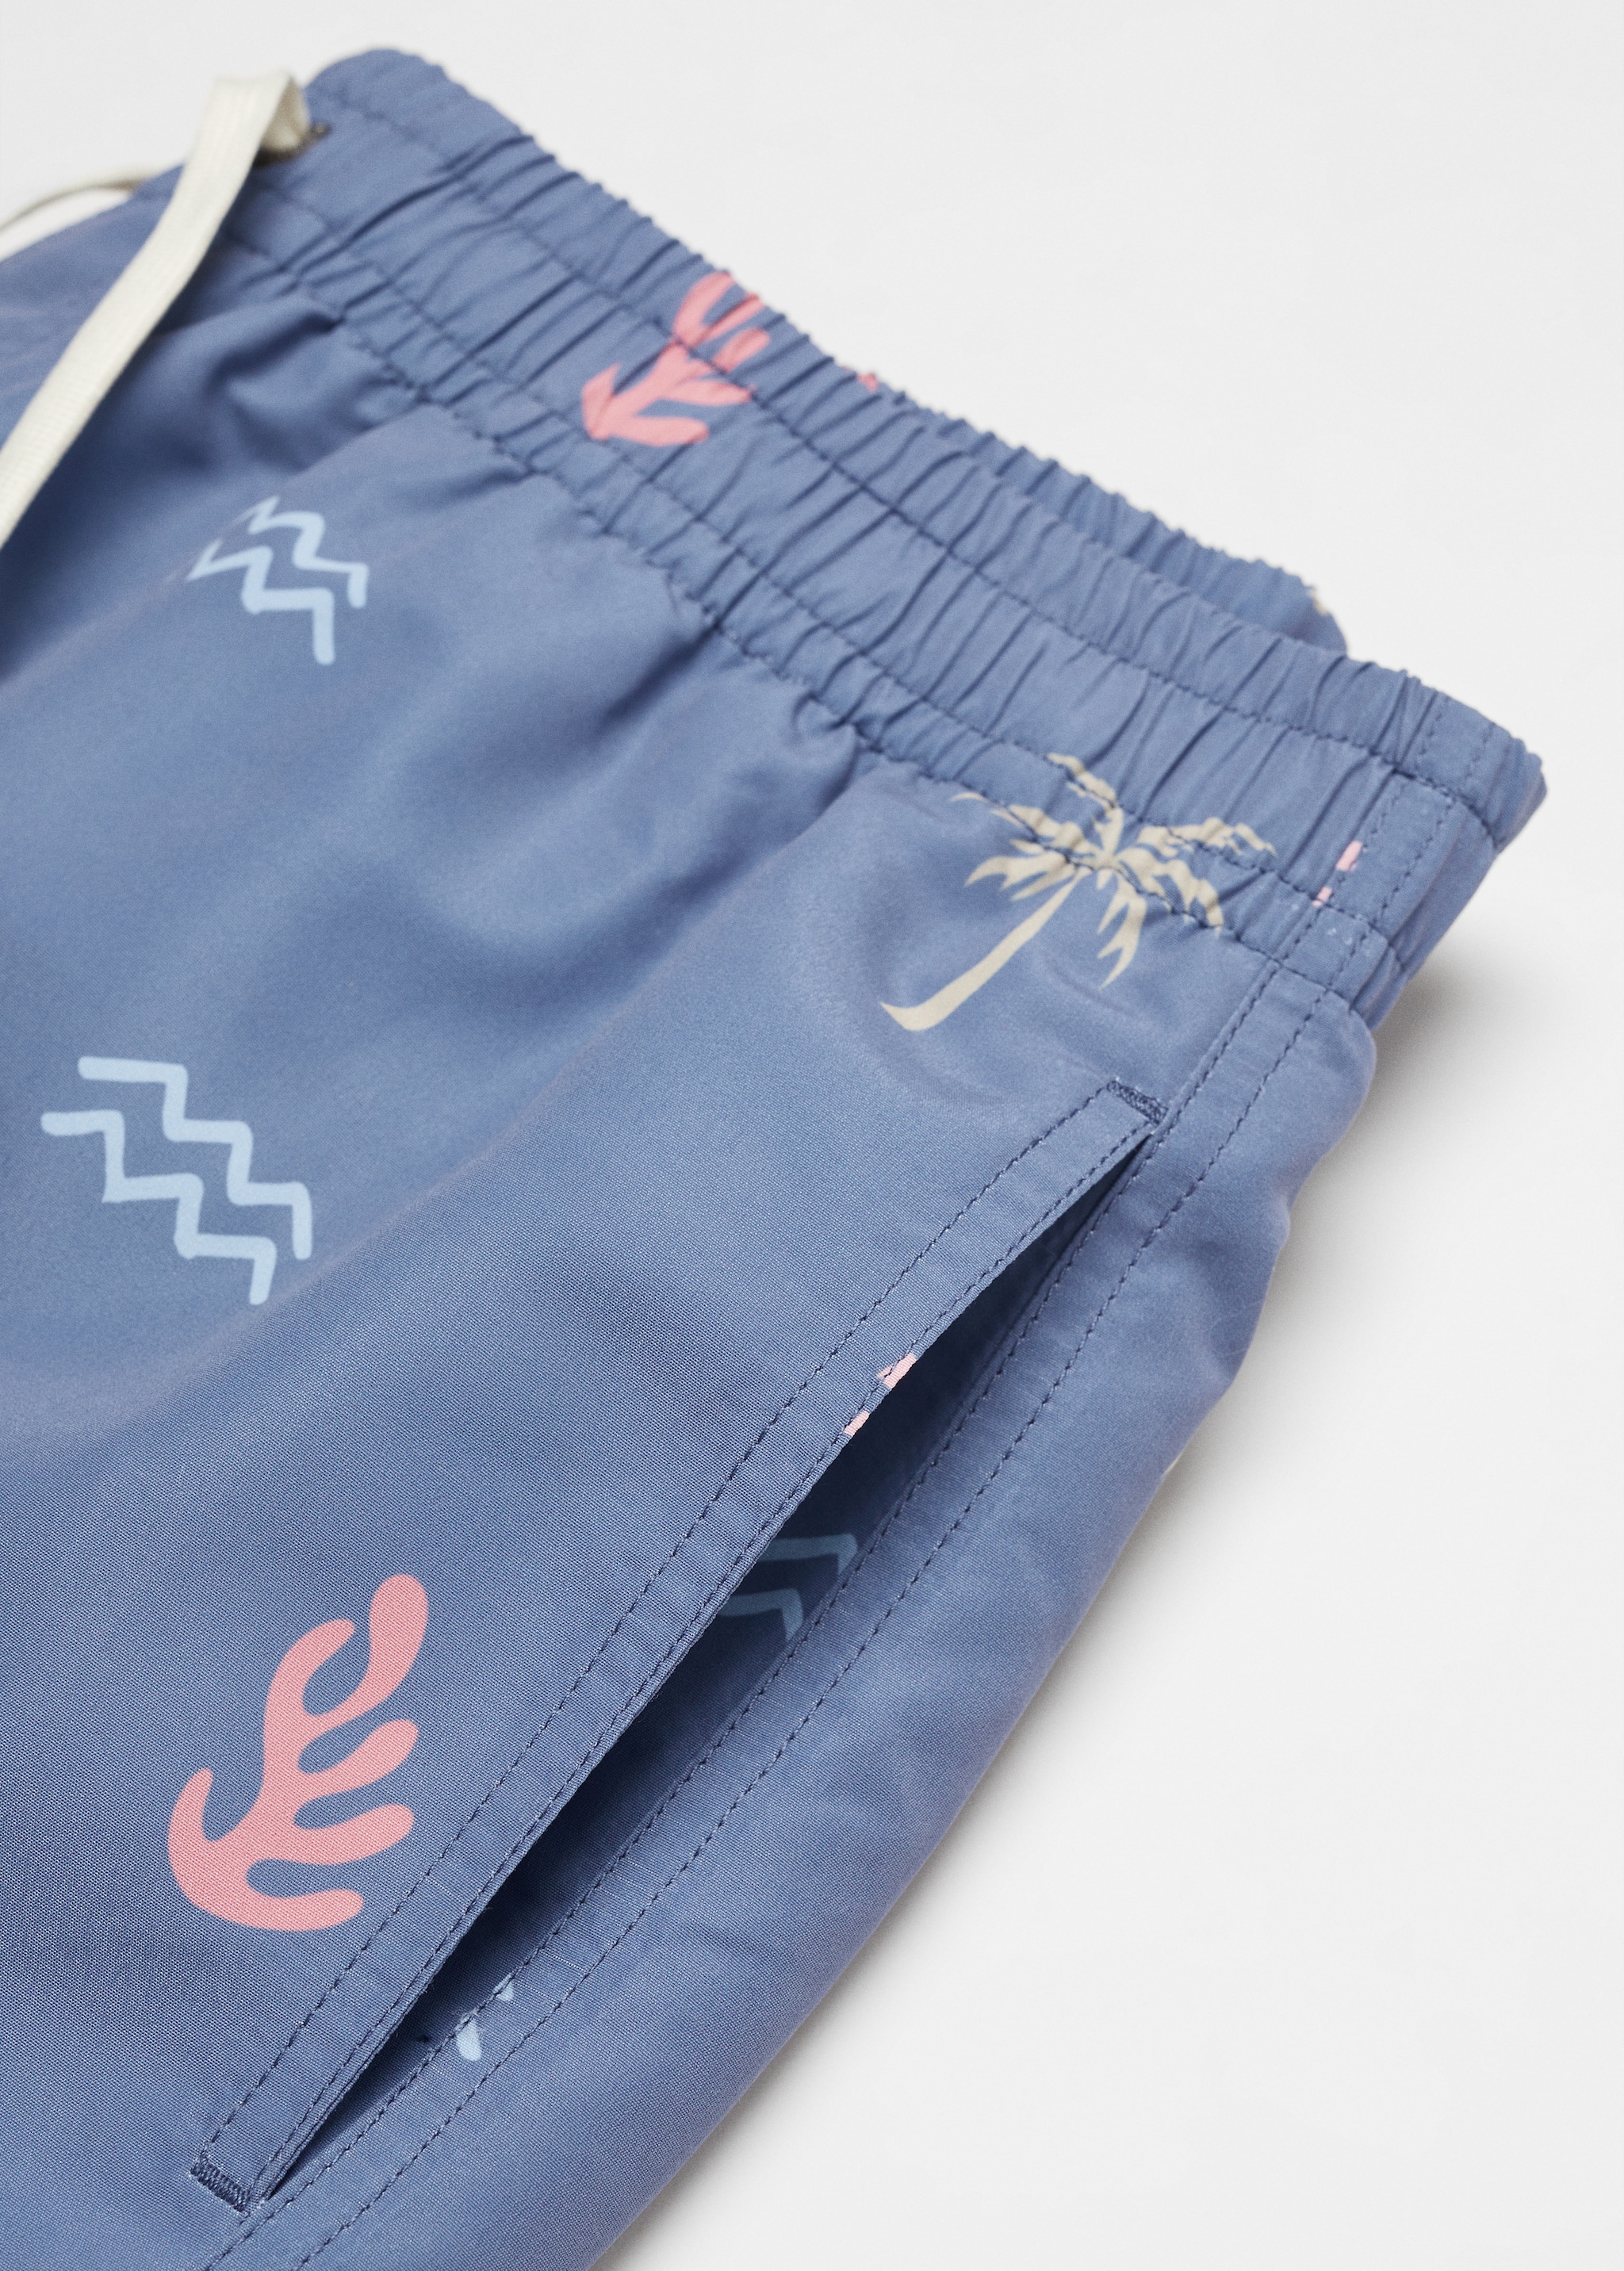 Marine print swimming trunks - Details of the article 8